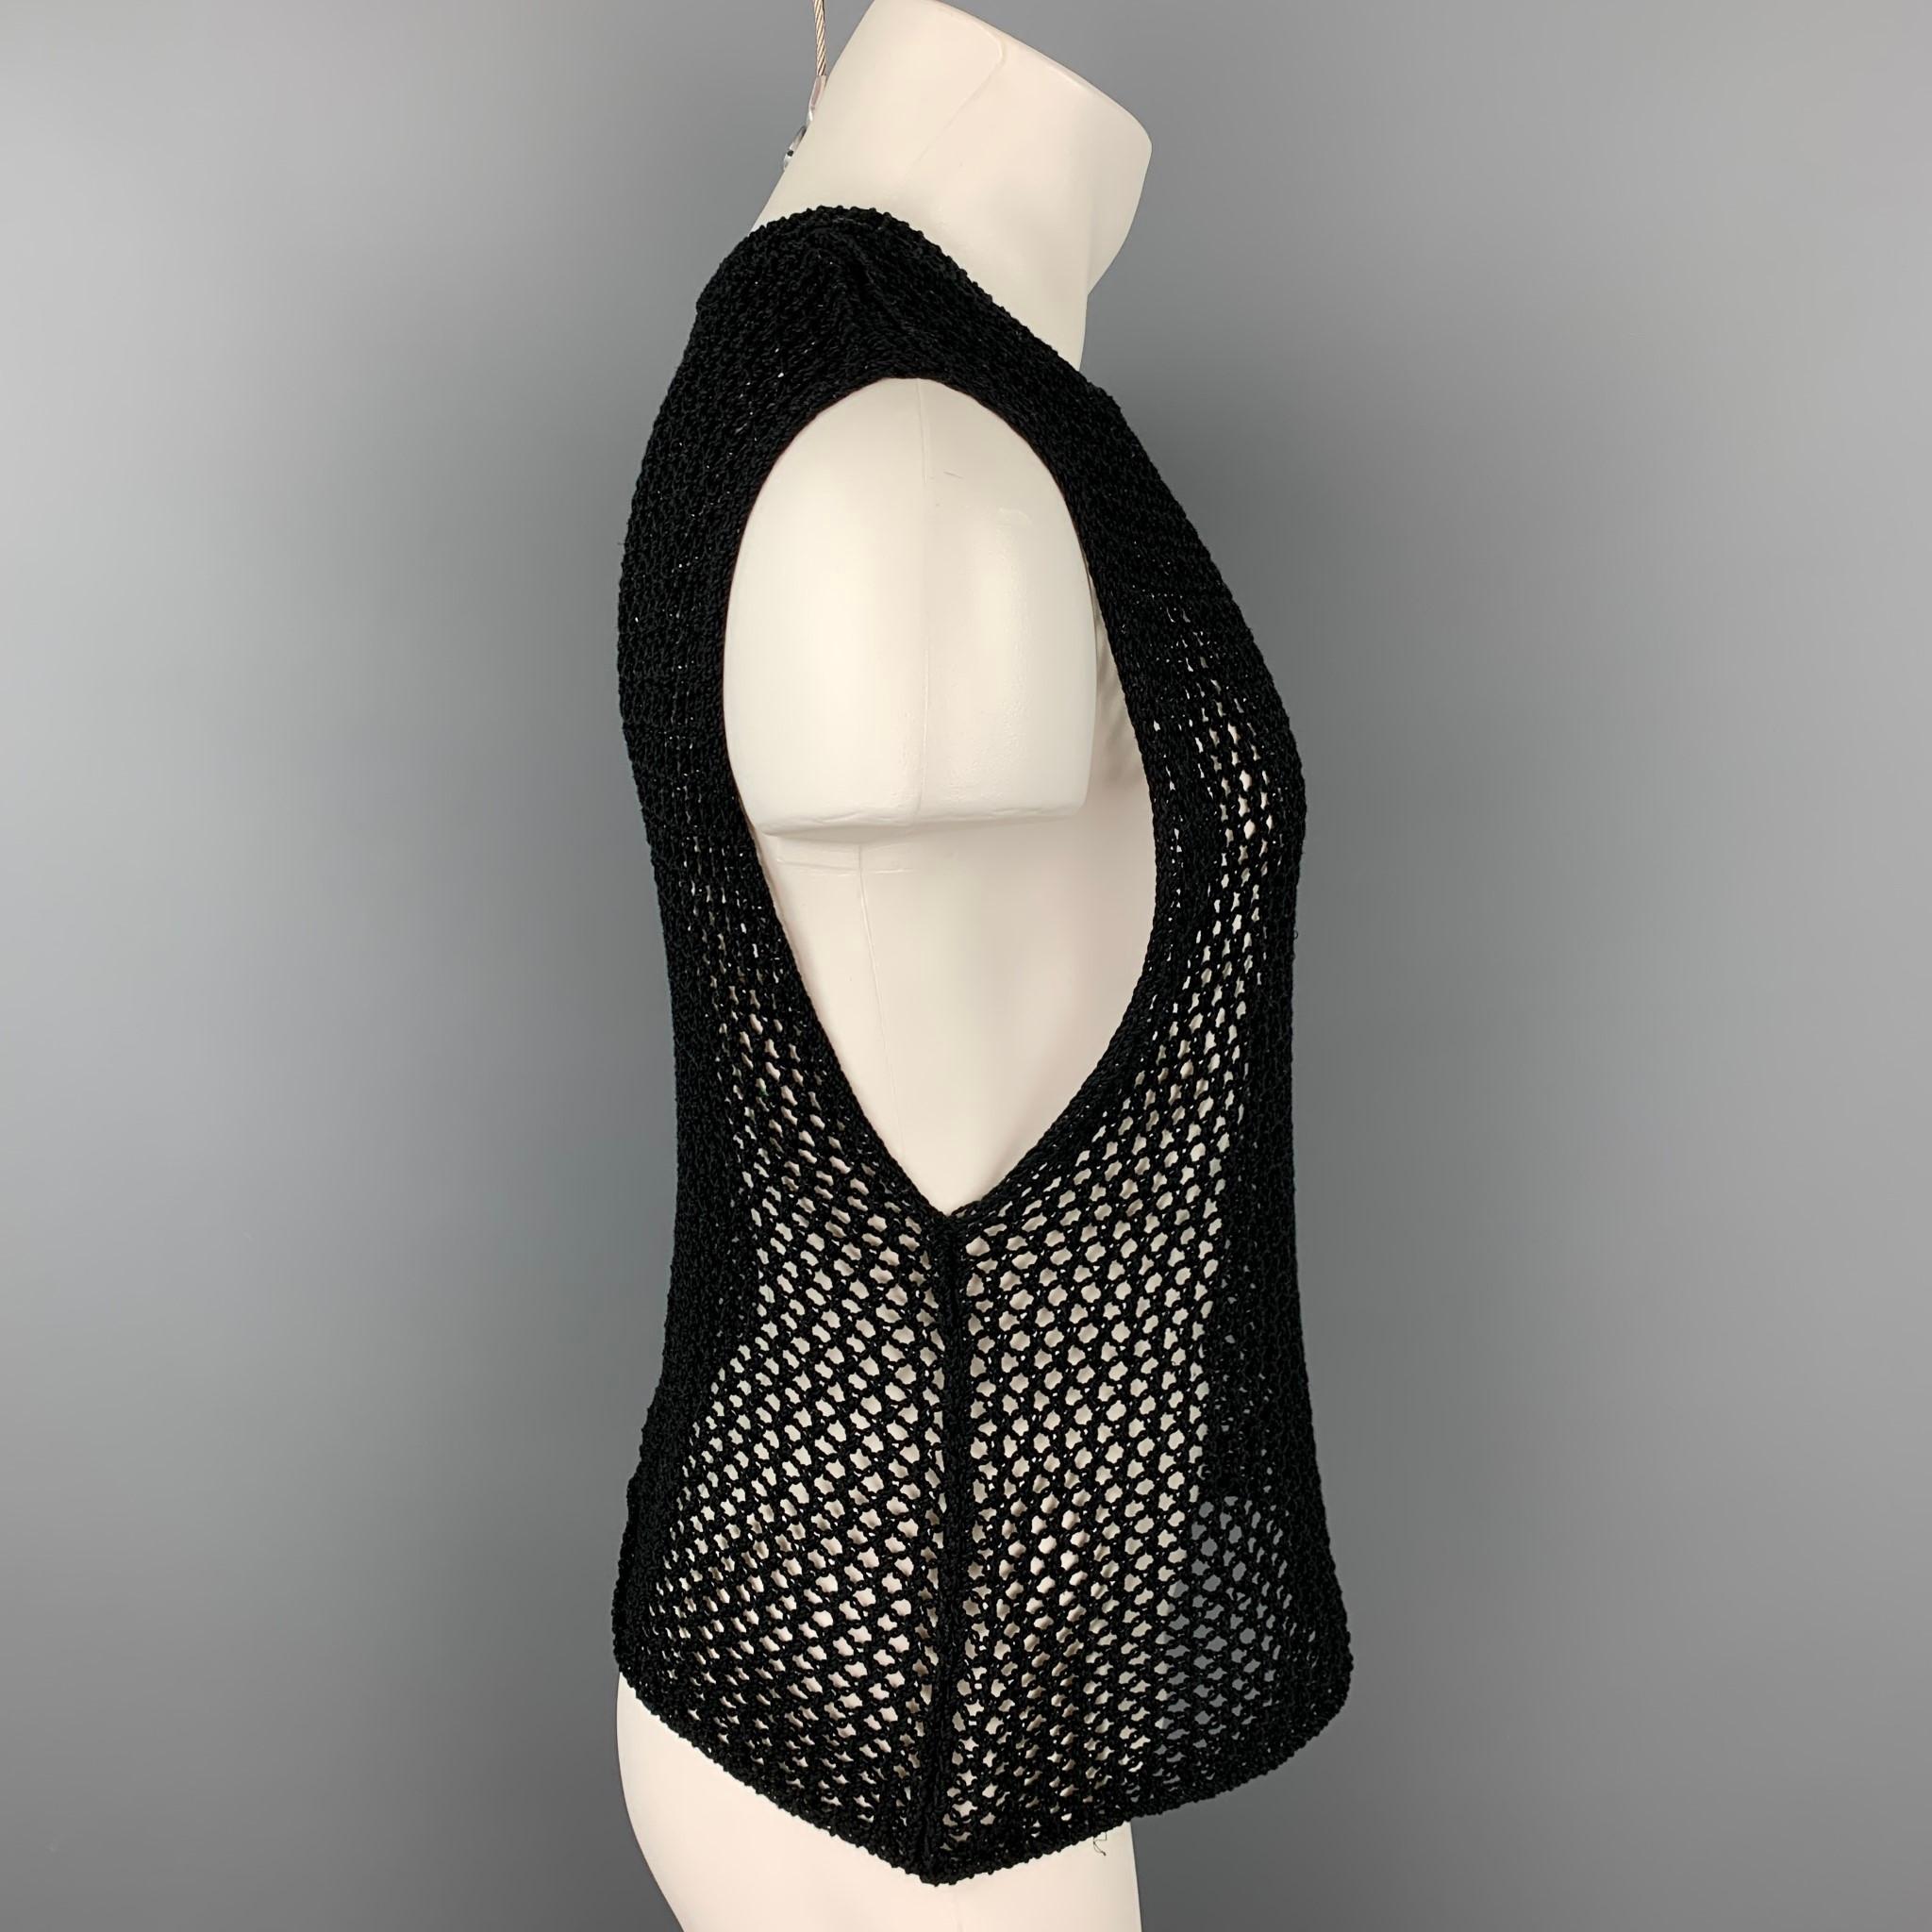 DRIES VAN NOTEN vest comes in a black knitted cotton featuring a crew-neck. 

Very Good Pre-Owned Condition.
Marked: S

Measurements:

Shoulder: 18 in.
Chest: 38 in.
Length: 22.5 in. 